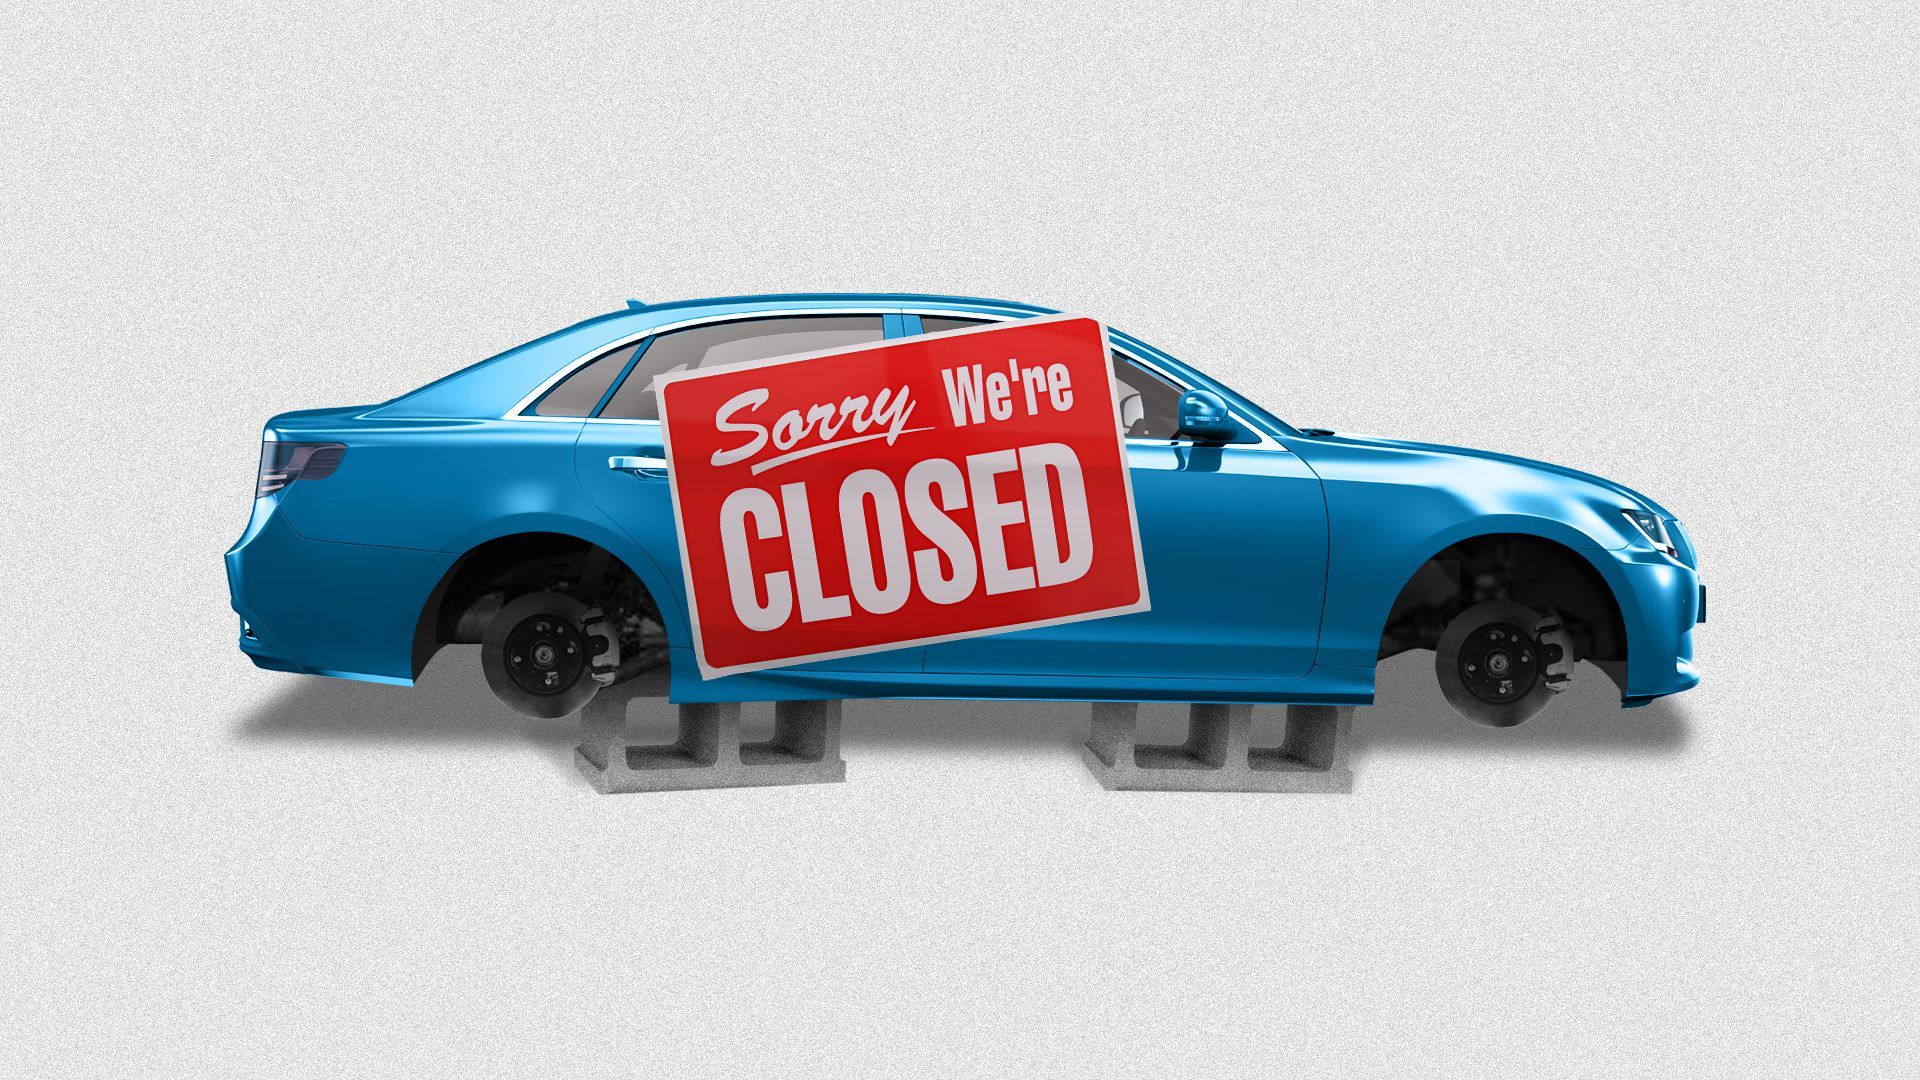 Axios illustration of a "Sorry, we're closed" sign in front of a car on the factory line